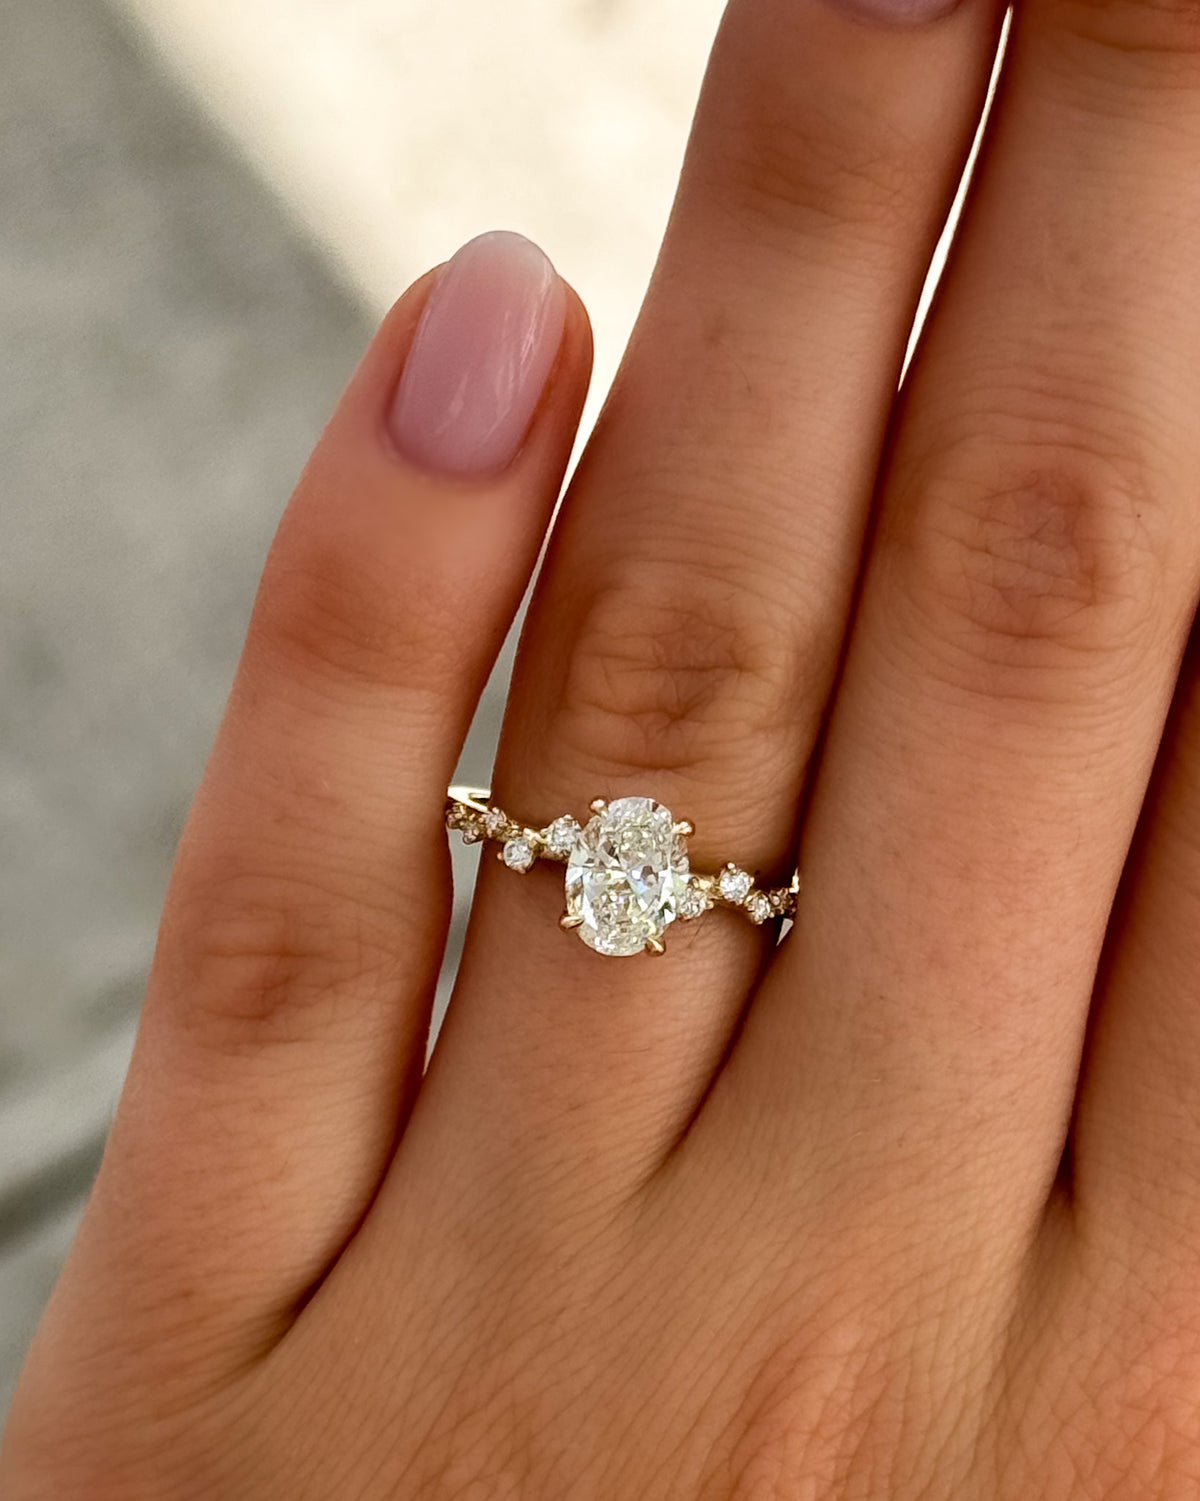 Starfire Engagement Ring with Oval Cut Diamond